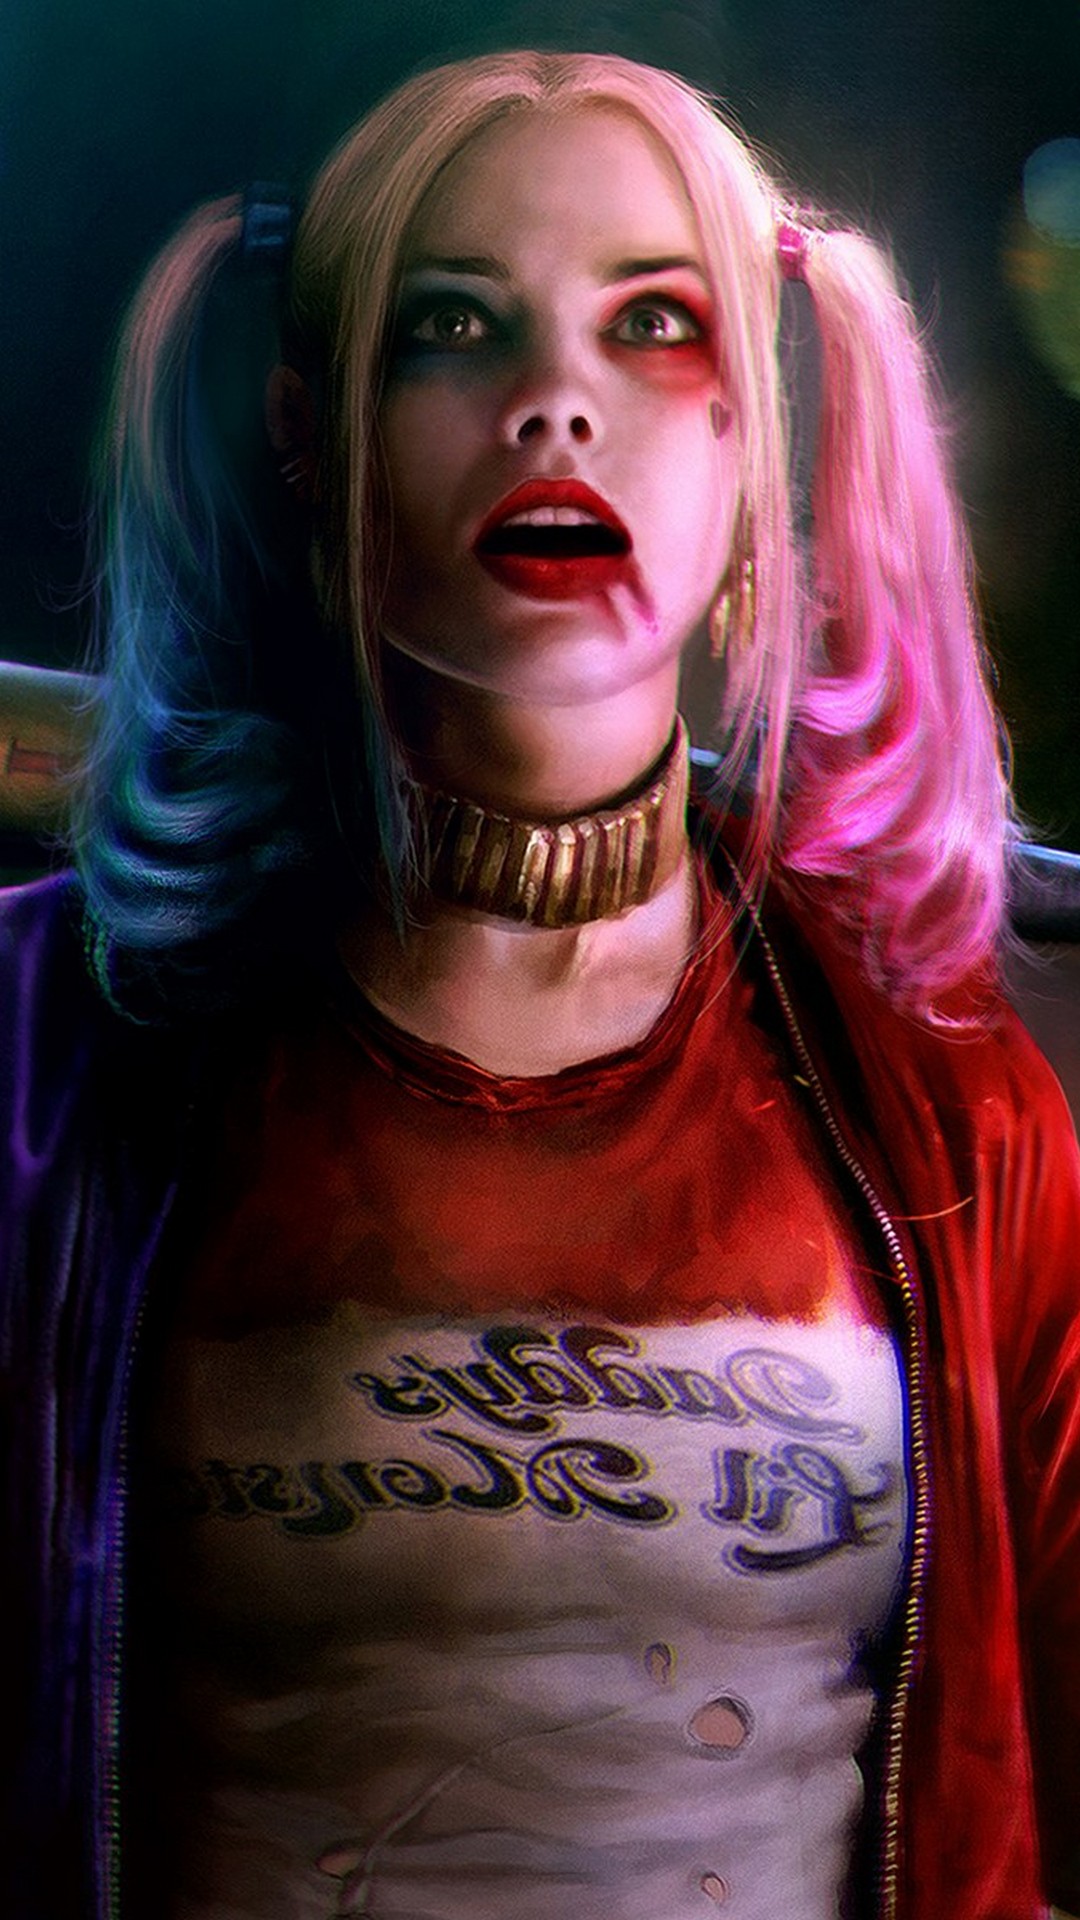 Harley Quinn iPhone 8 Wallpaper with image resolution 1080x1920 pixel. You can use this wallpaper as background for your desktop Computer Screensavers, Android or iPhone smartphones